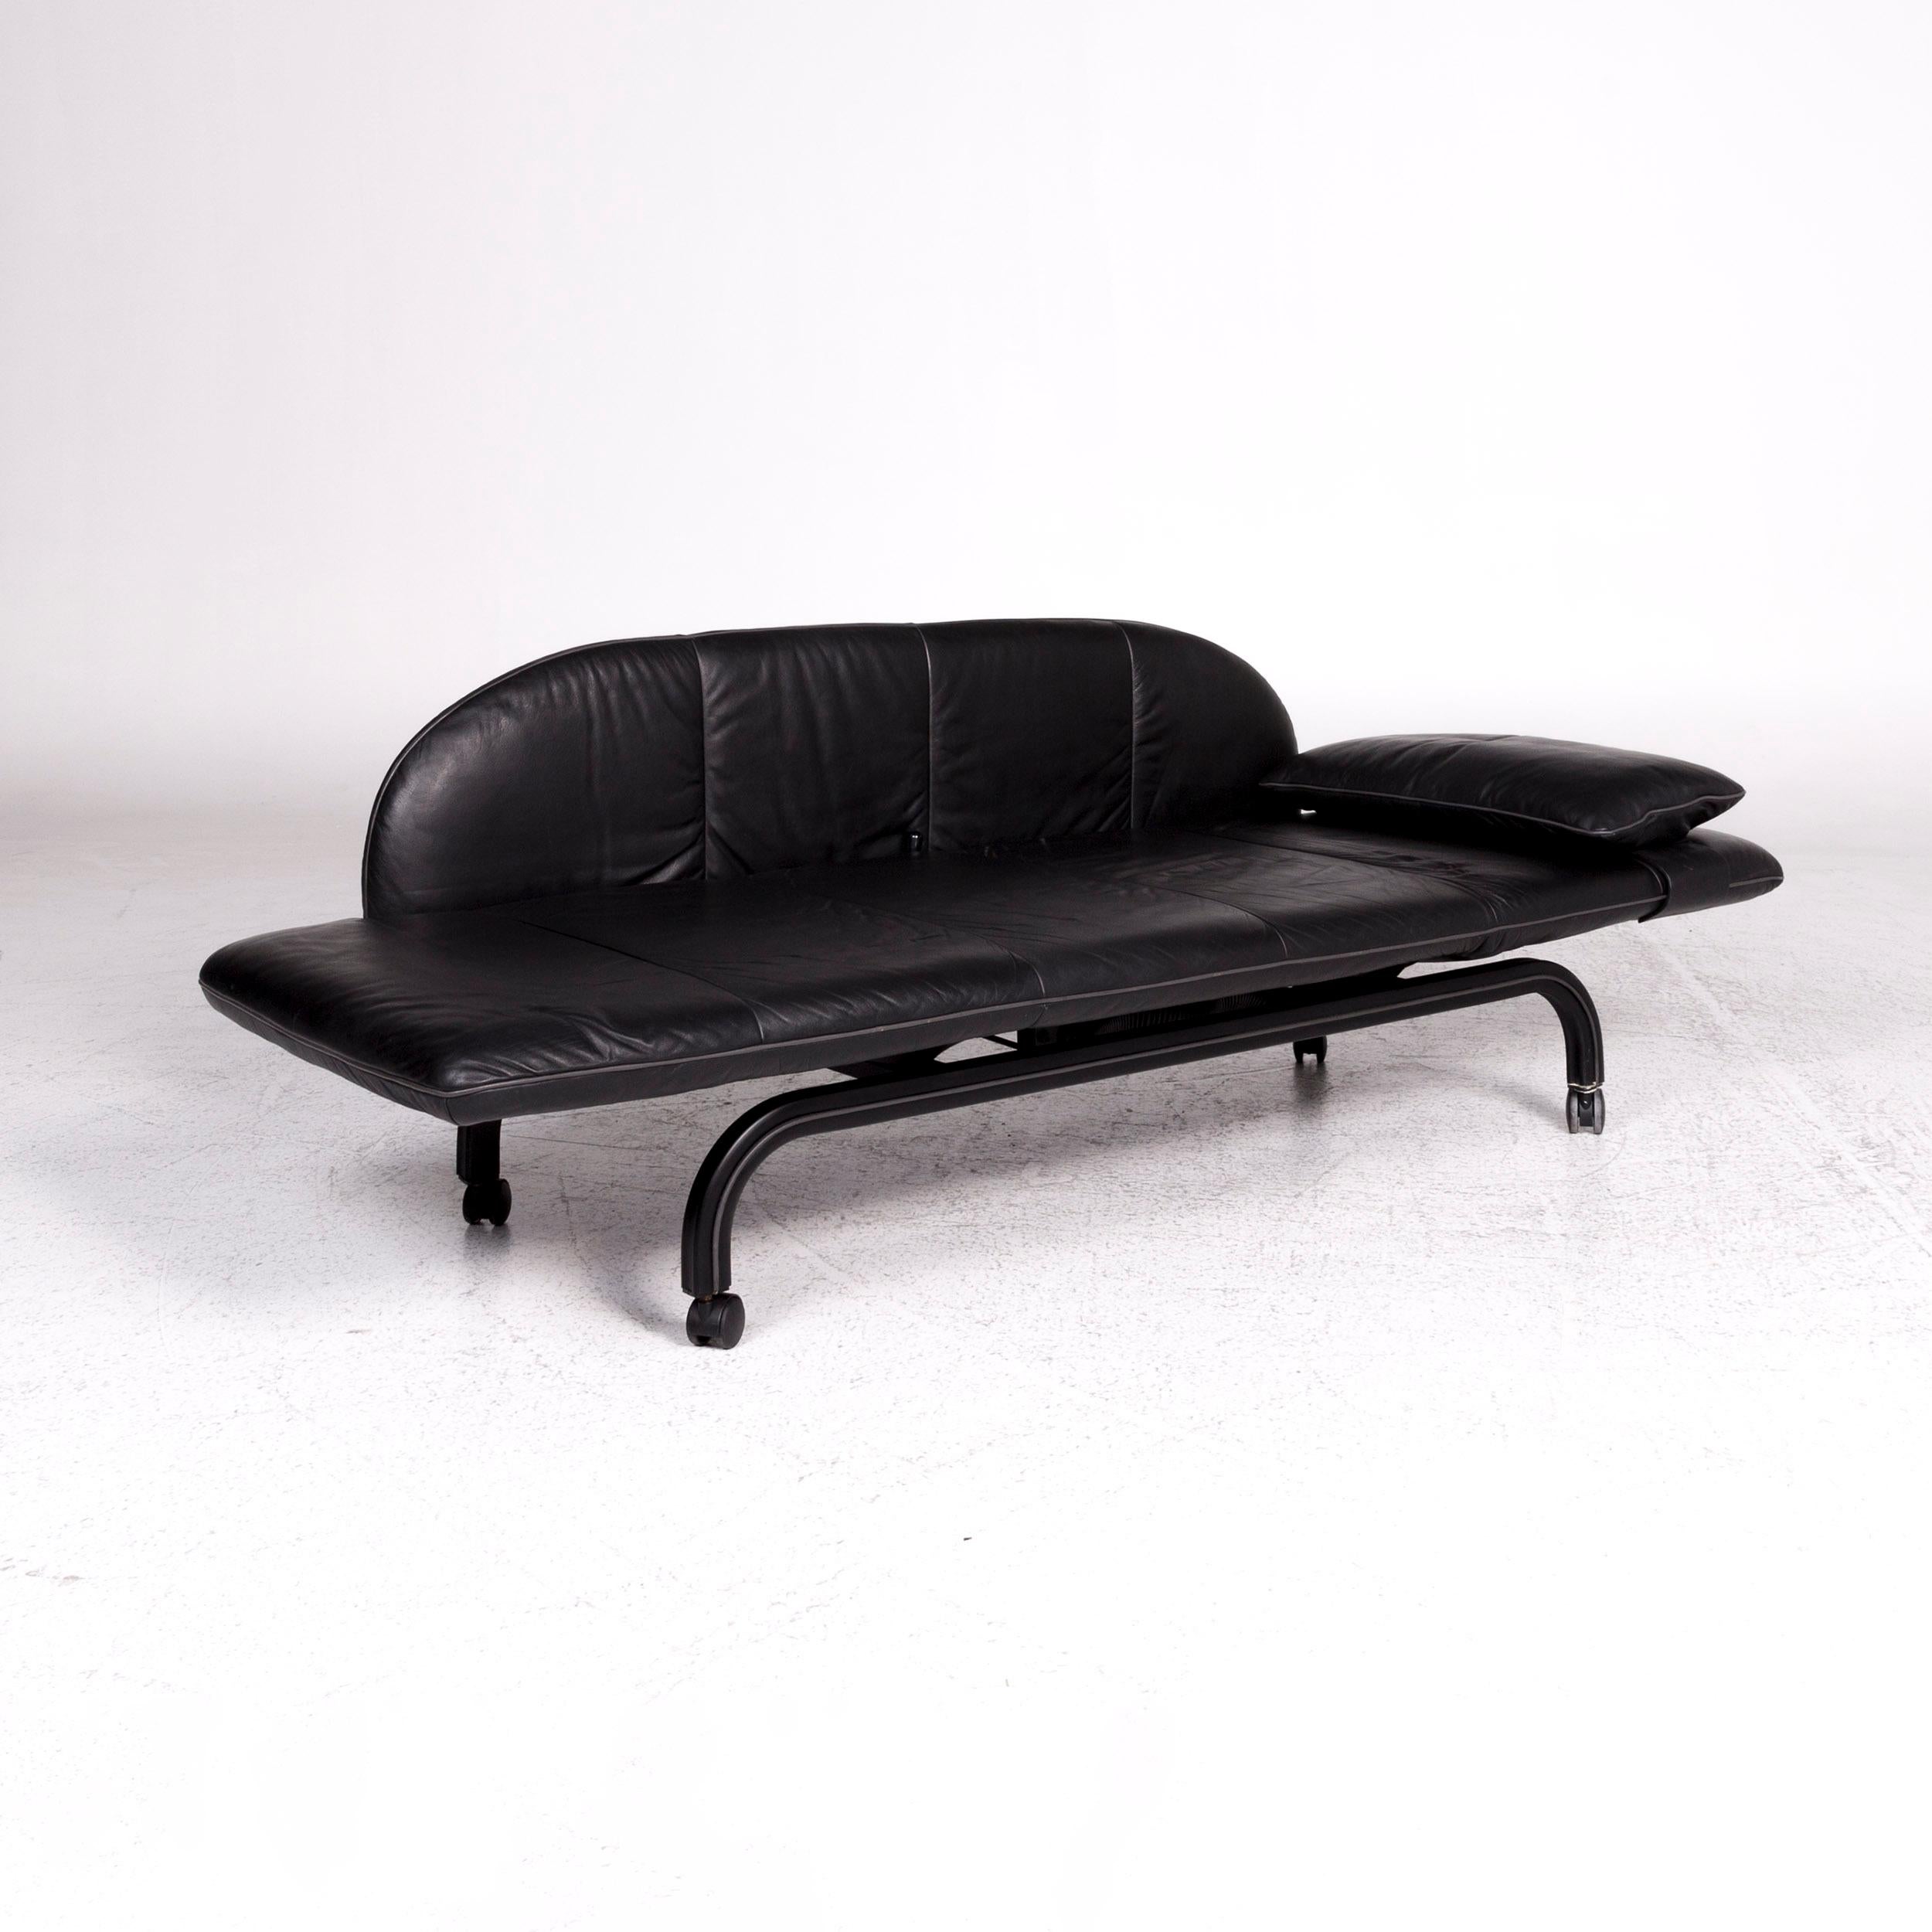 Contemporary Interprofil Beo Leather Lounger Black Relax